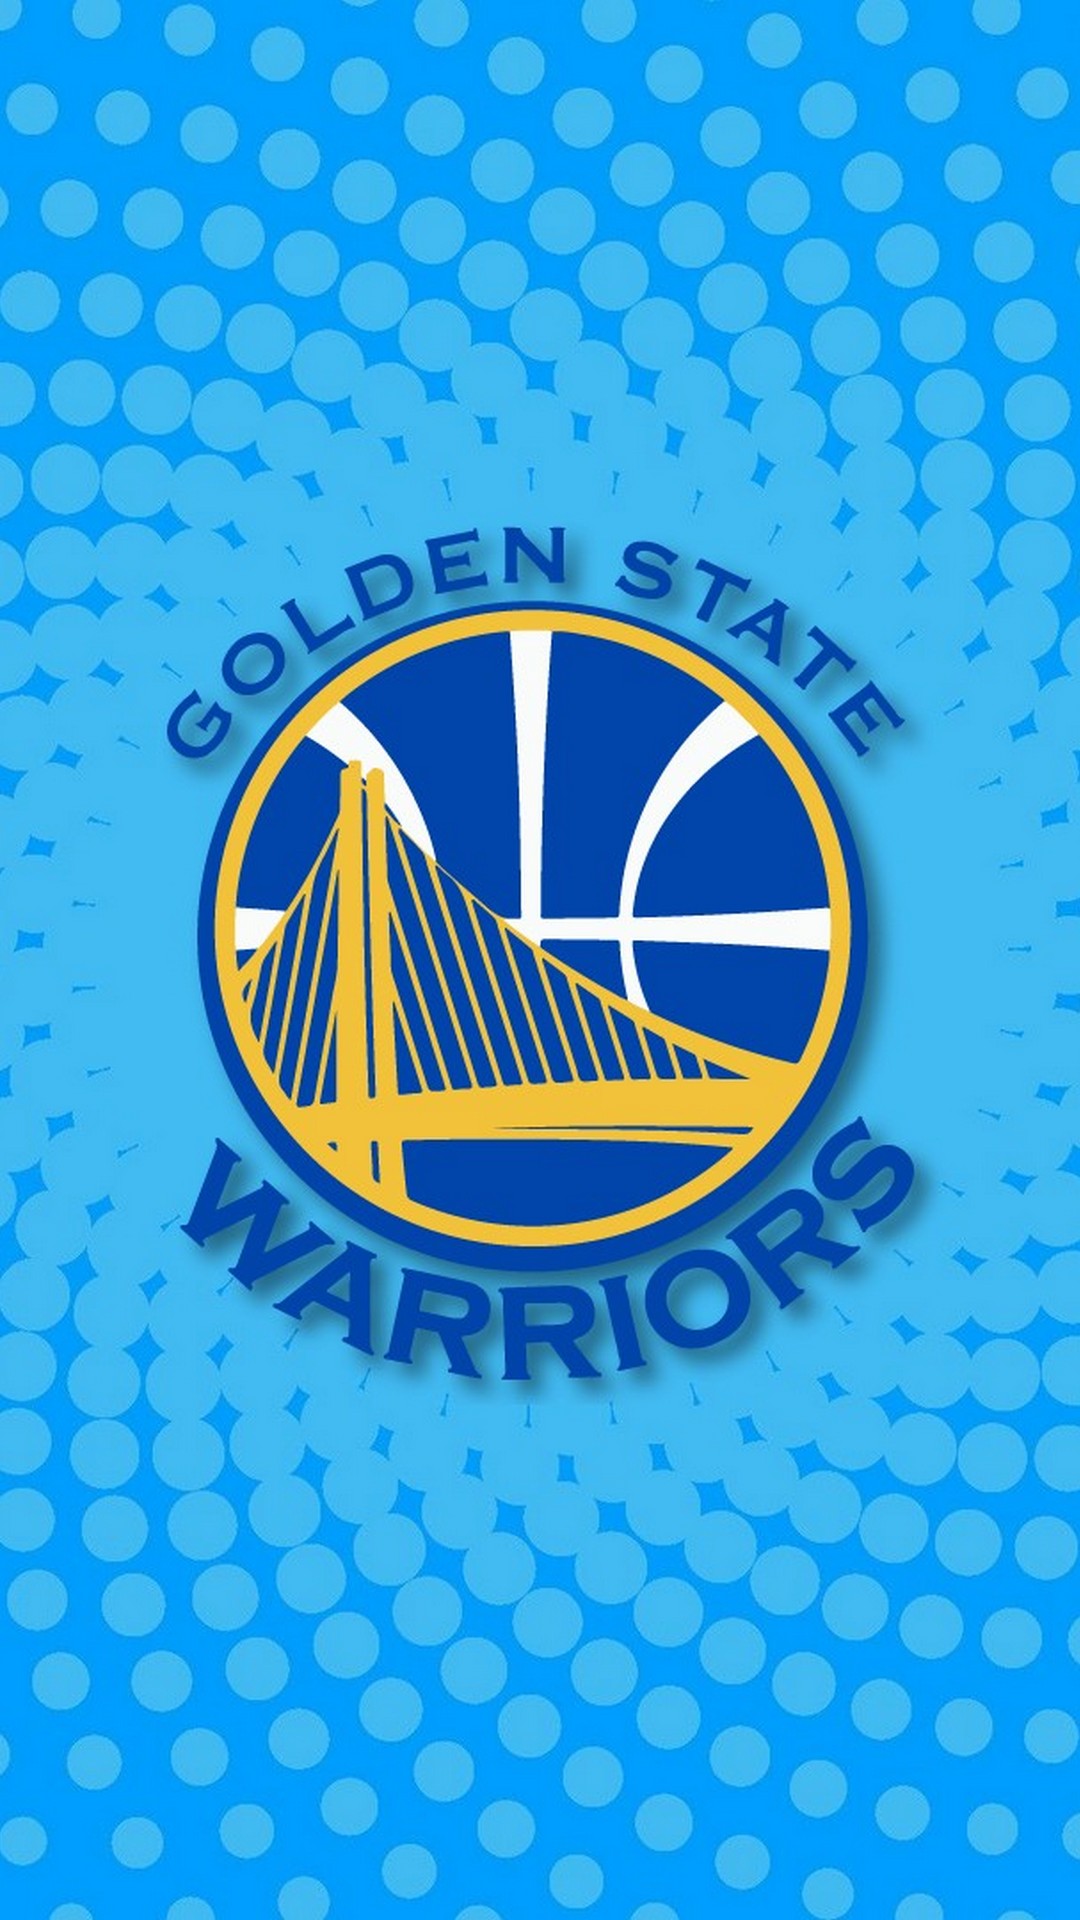 Golden State Warriors Mobile Wallpaper with image dimensions 1080x1920 pixel. You can make this wallpaper for your Desktop Computer Backgrounds, Windows or Mac Screensavers, iPhone Lock screen, Tablet or Android and another Mobile Phone device